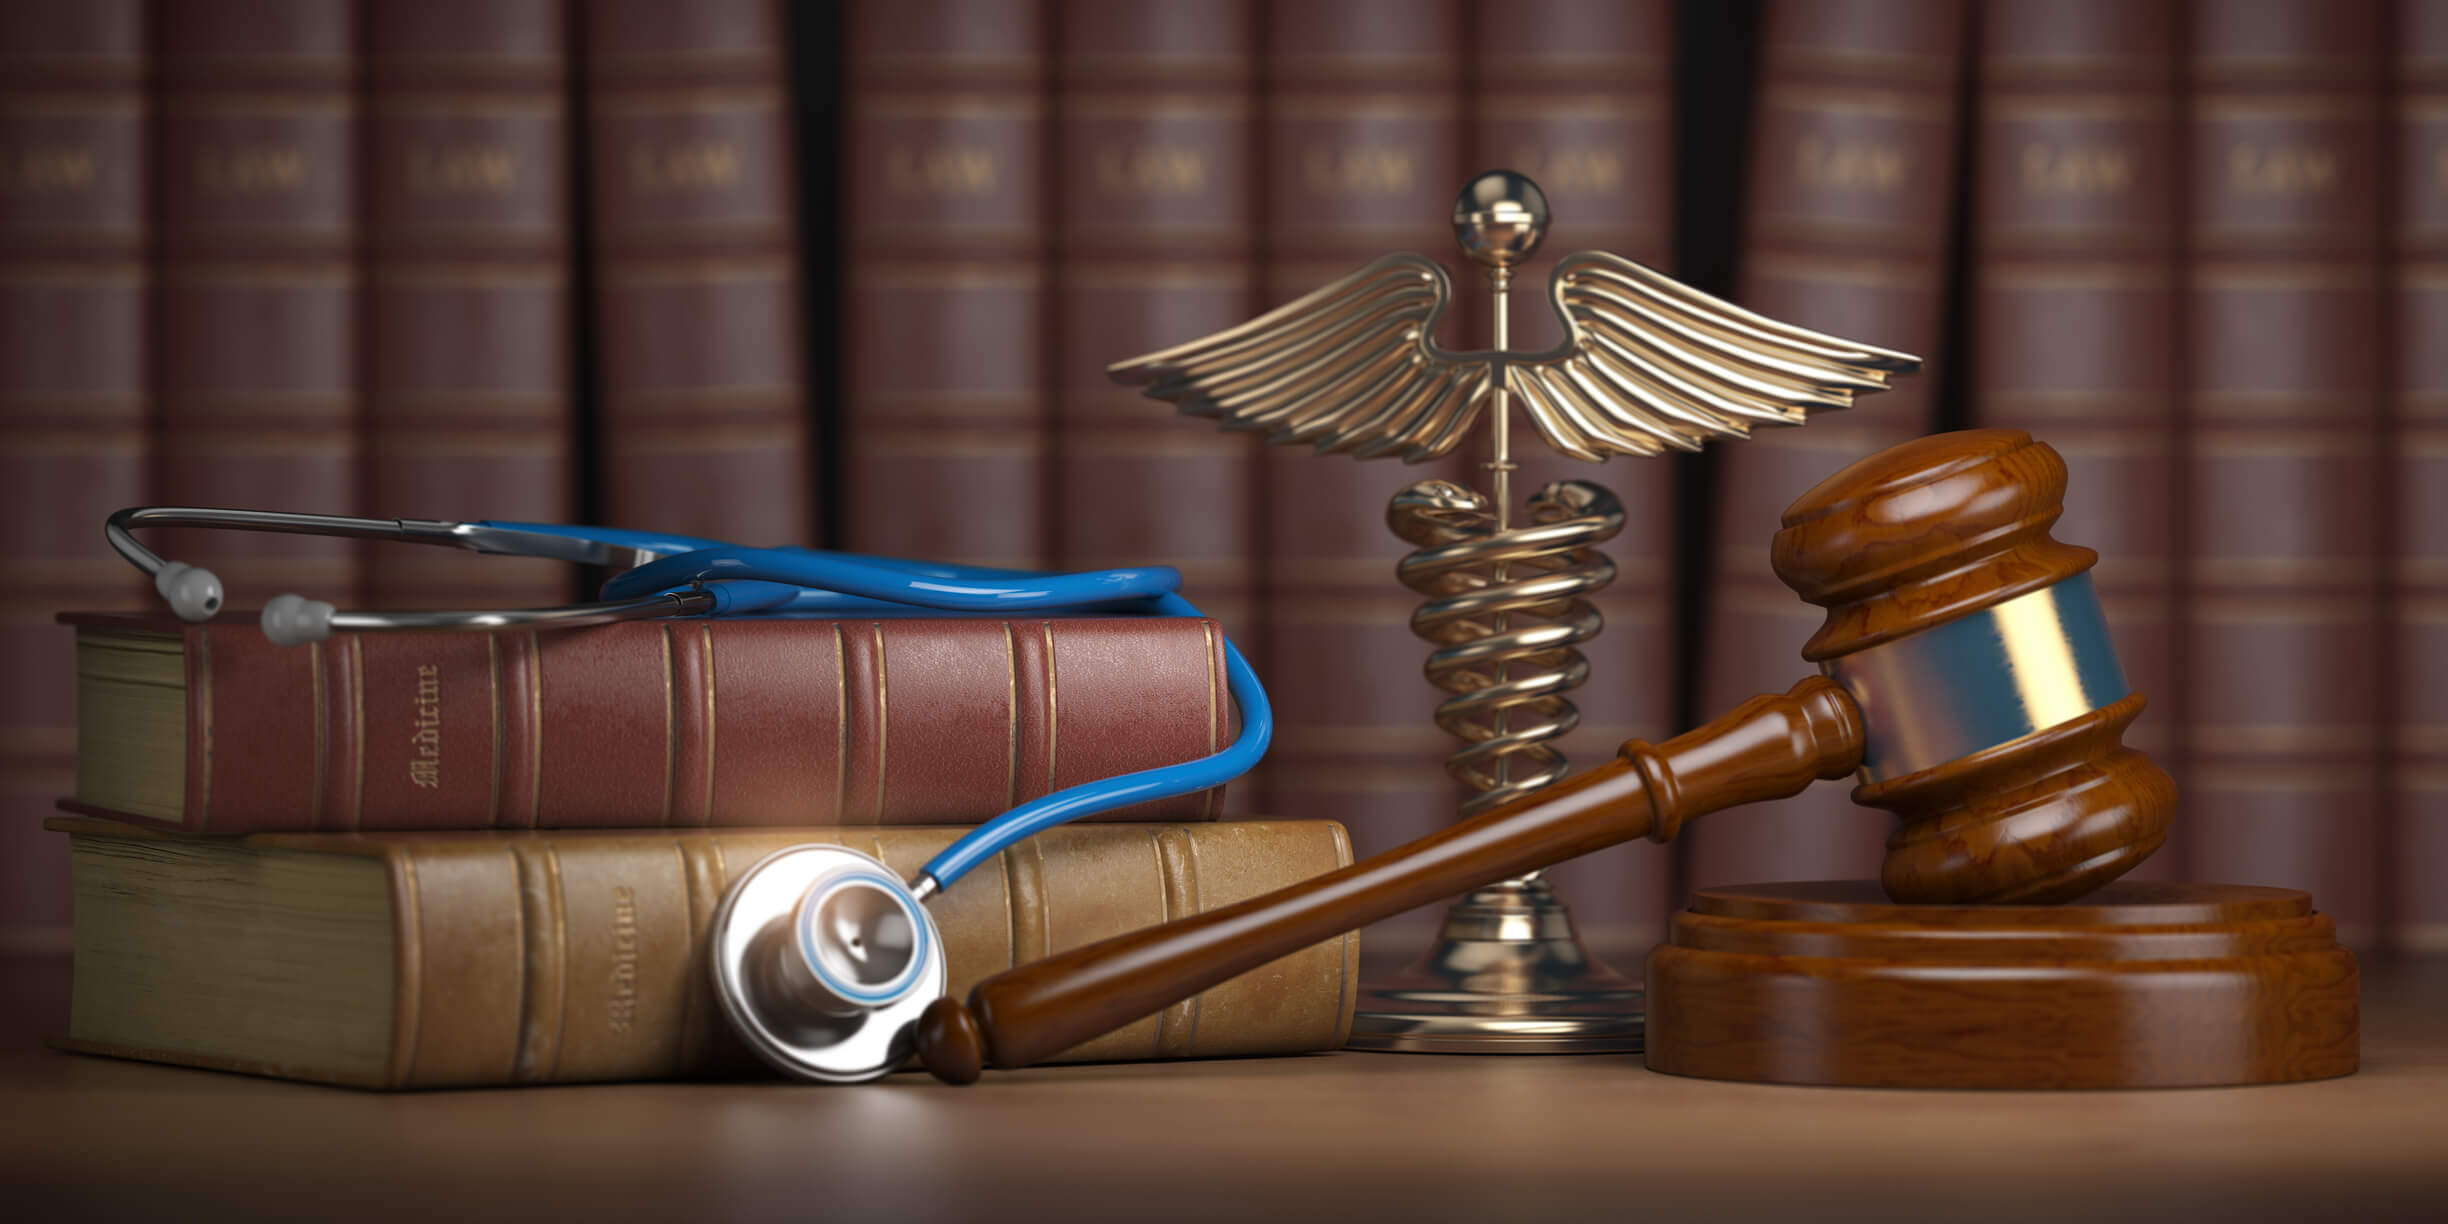 Cooper Schall & Levy discuss what constitutes as surgical malpractice.